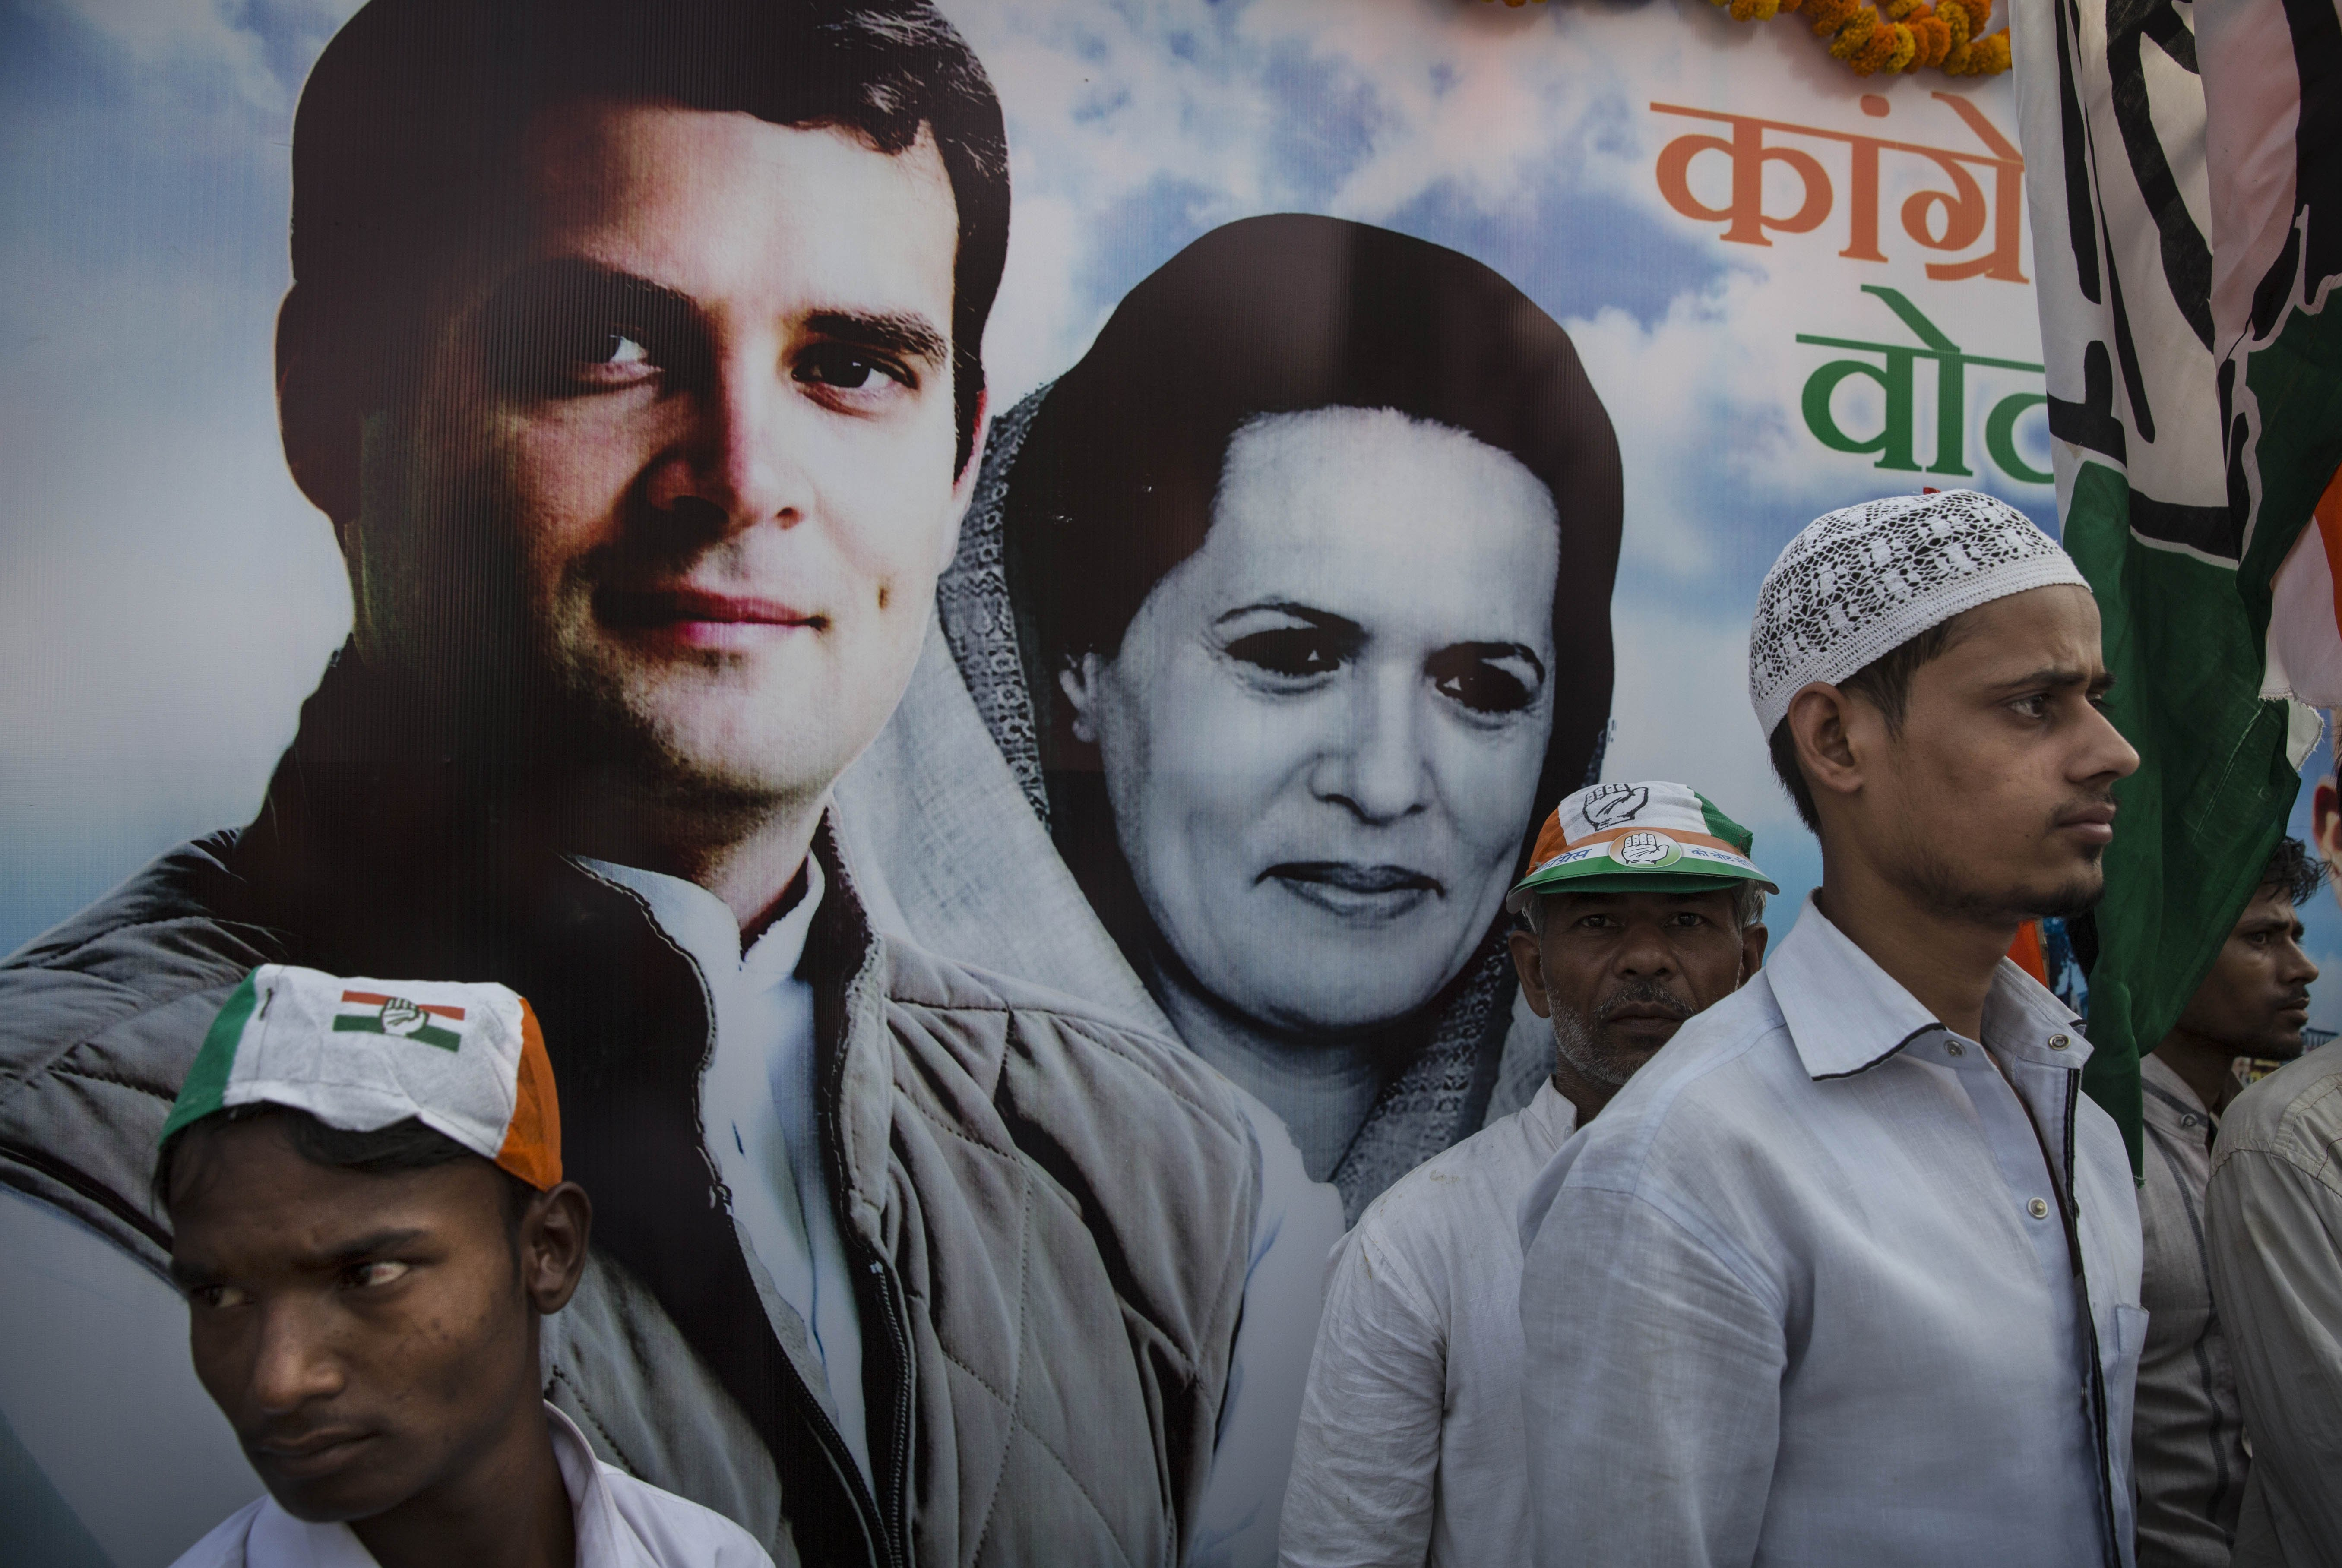 Supporters of the Congress Party stand in front of a poster showing Rahul Gandhi and his mother and party president Sonia Gandhi as they wait before a rally on May 10, 2014 in  Varanasi.